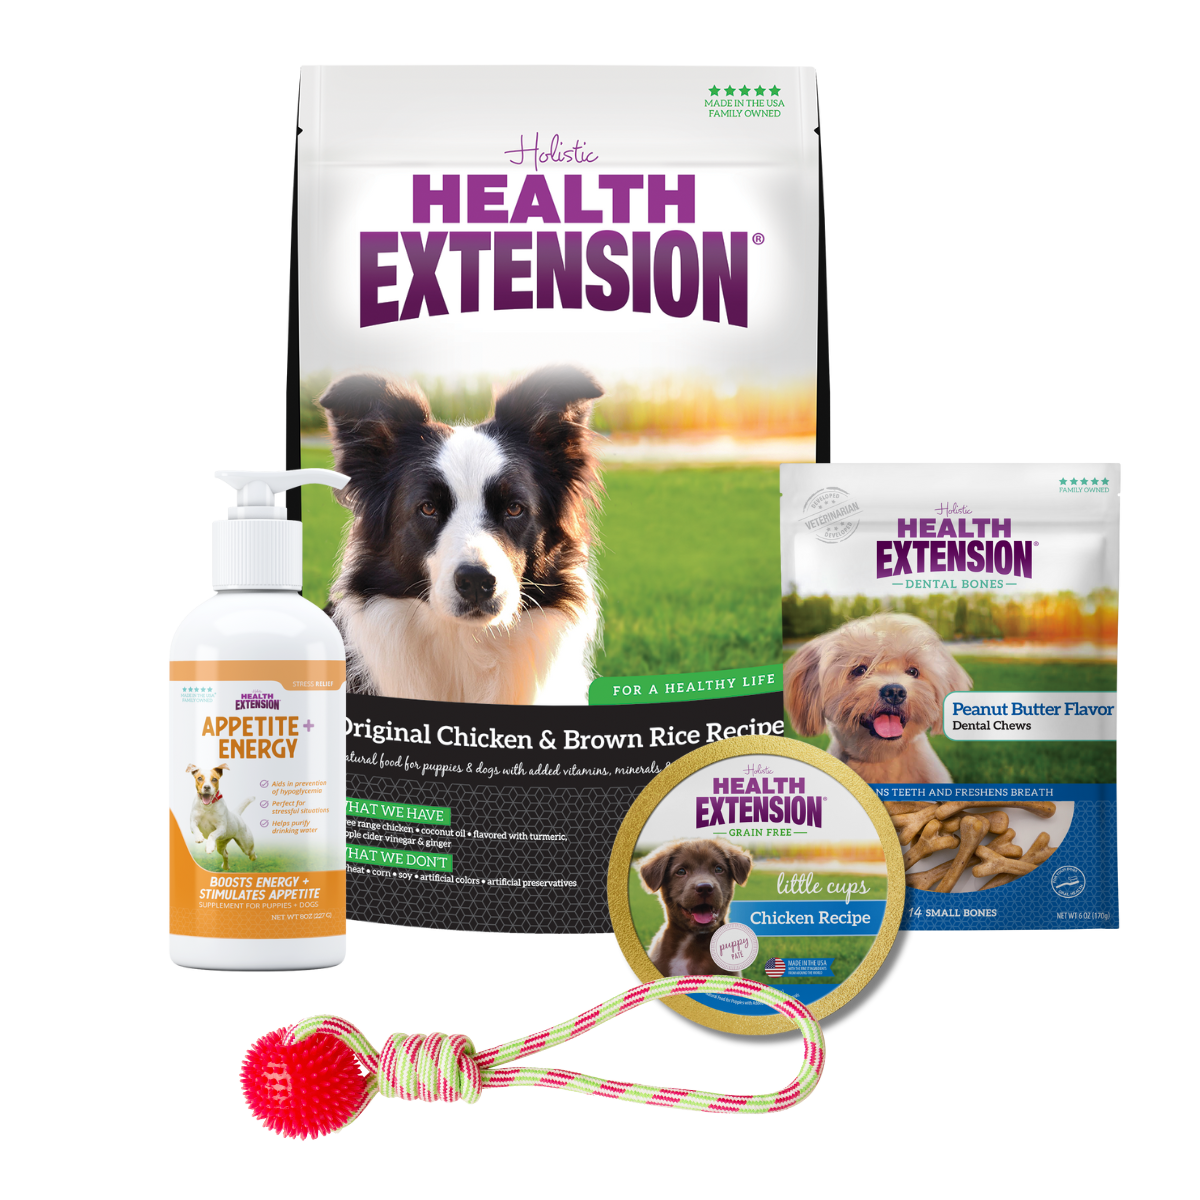 Complete Puppy Bundle: Health Extension Original Chicken & Brown Rice Recipe dry dog food and variety of other dog products, including food, treats, toys, and supplements.